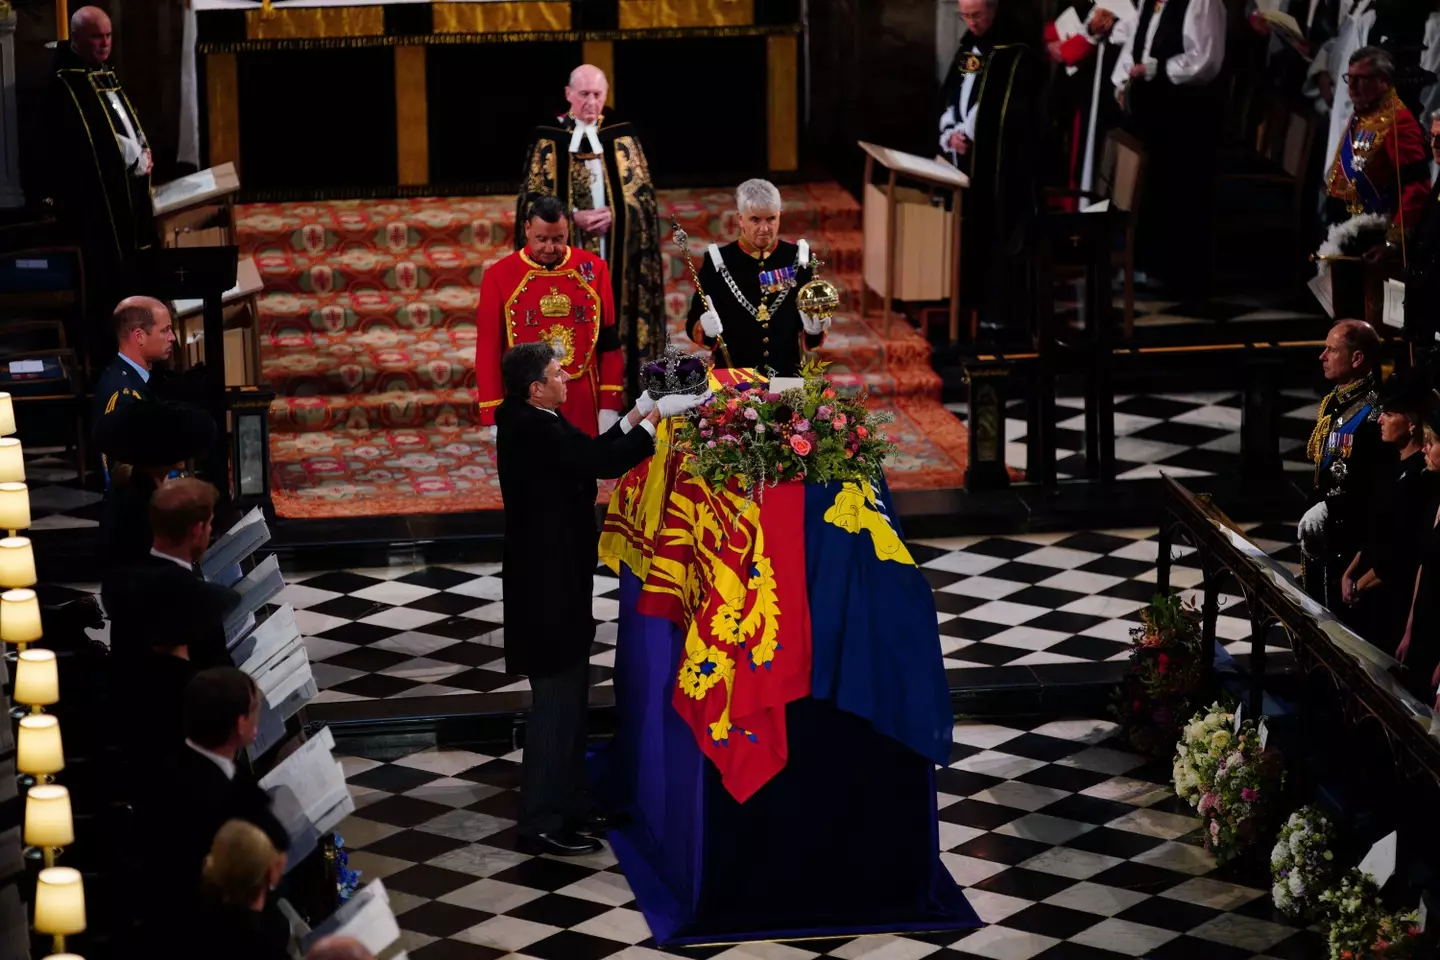 The Queen was laid to rest on 19 September.